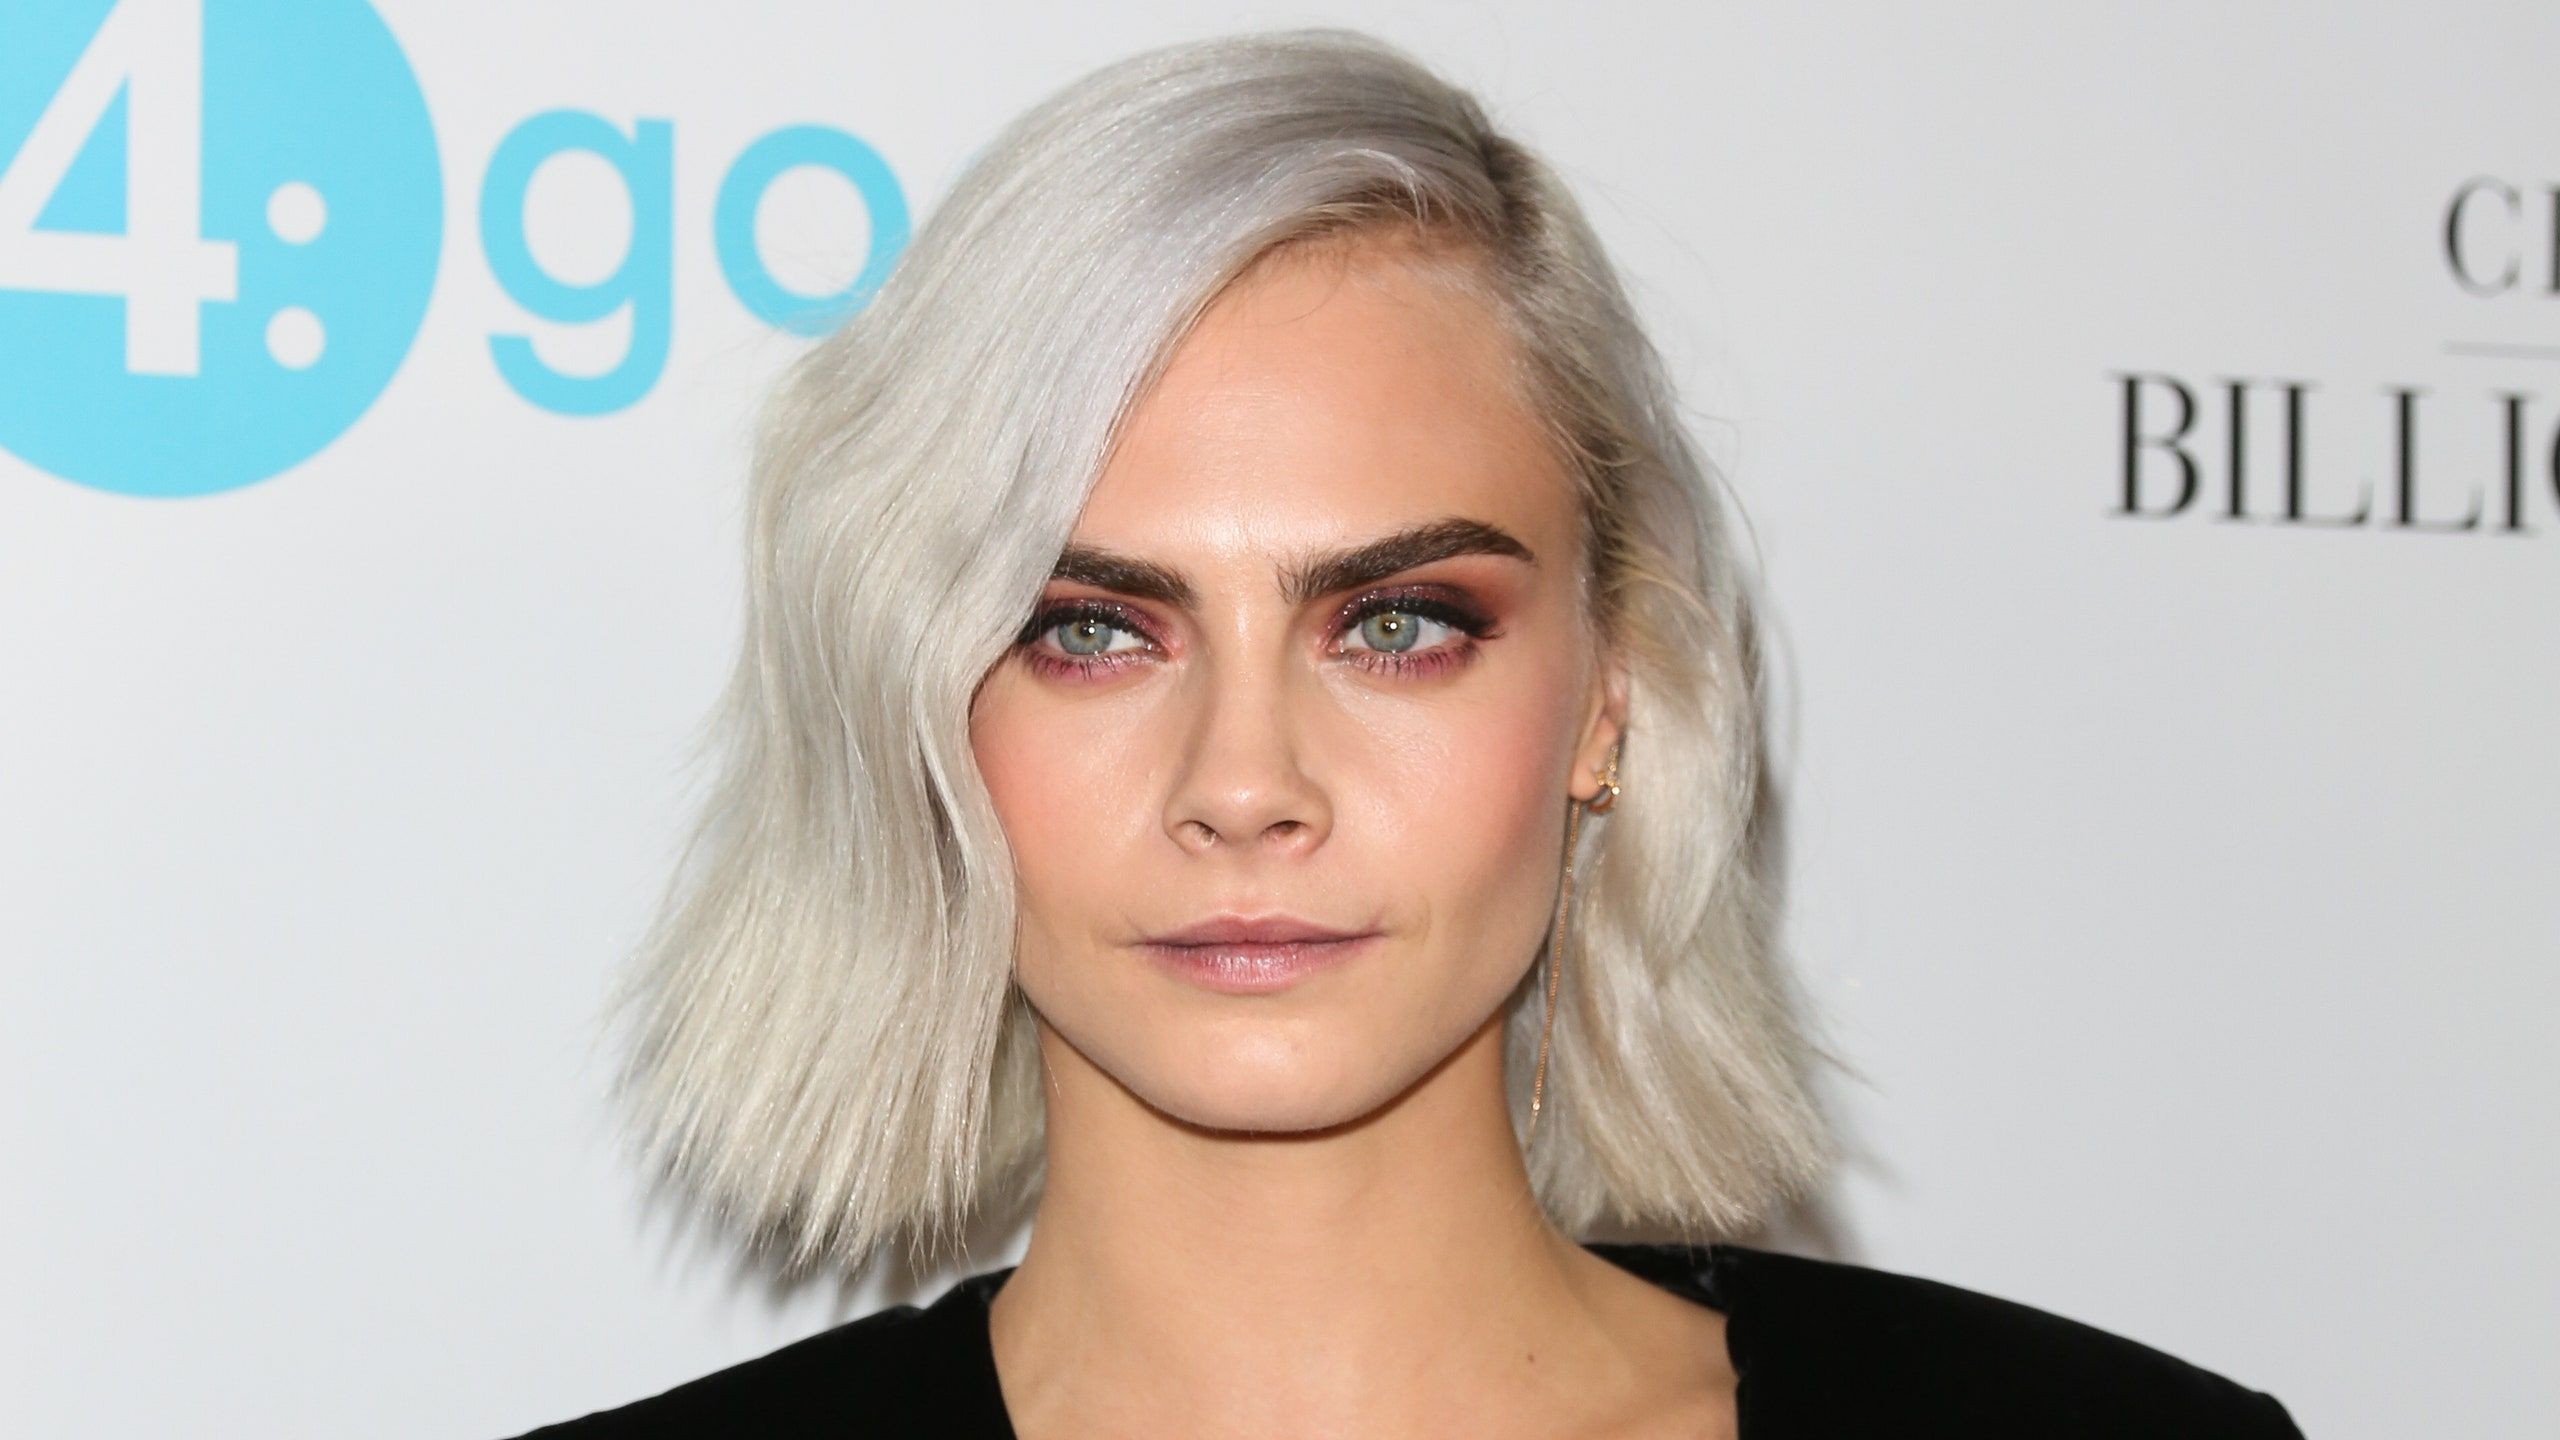 Cara Delevingne Goes Bald for New Movie, Life in a Year